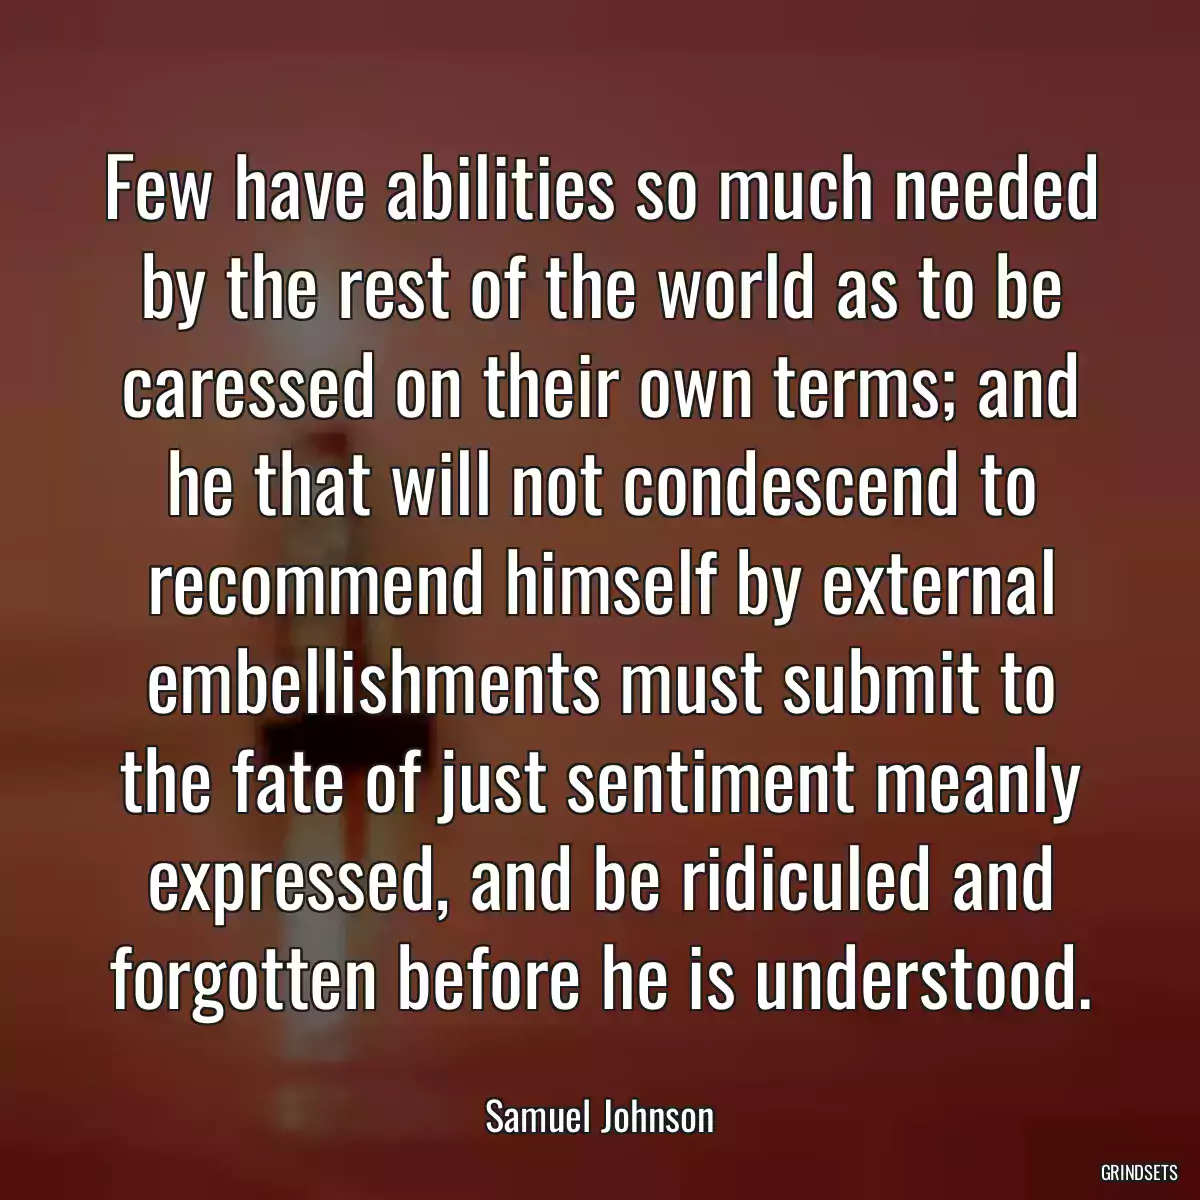 Few have abilities so much needed by the rest of the world as to be caressed on their own terms; and he that will not condescend to recommend himself by external embellishments must submit to the fate of just sentiment meanly expressed, and be ridiculed and forgotten before he is understood.